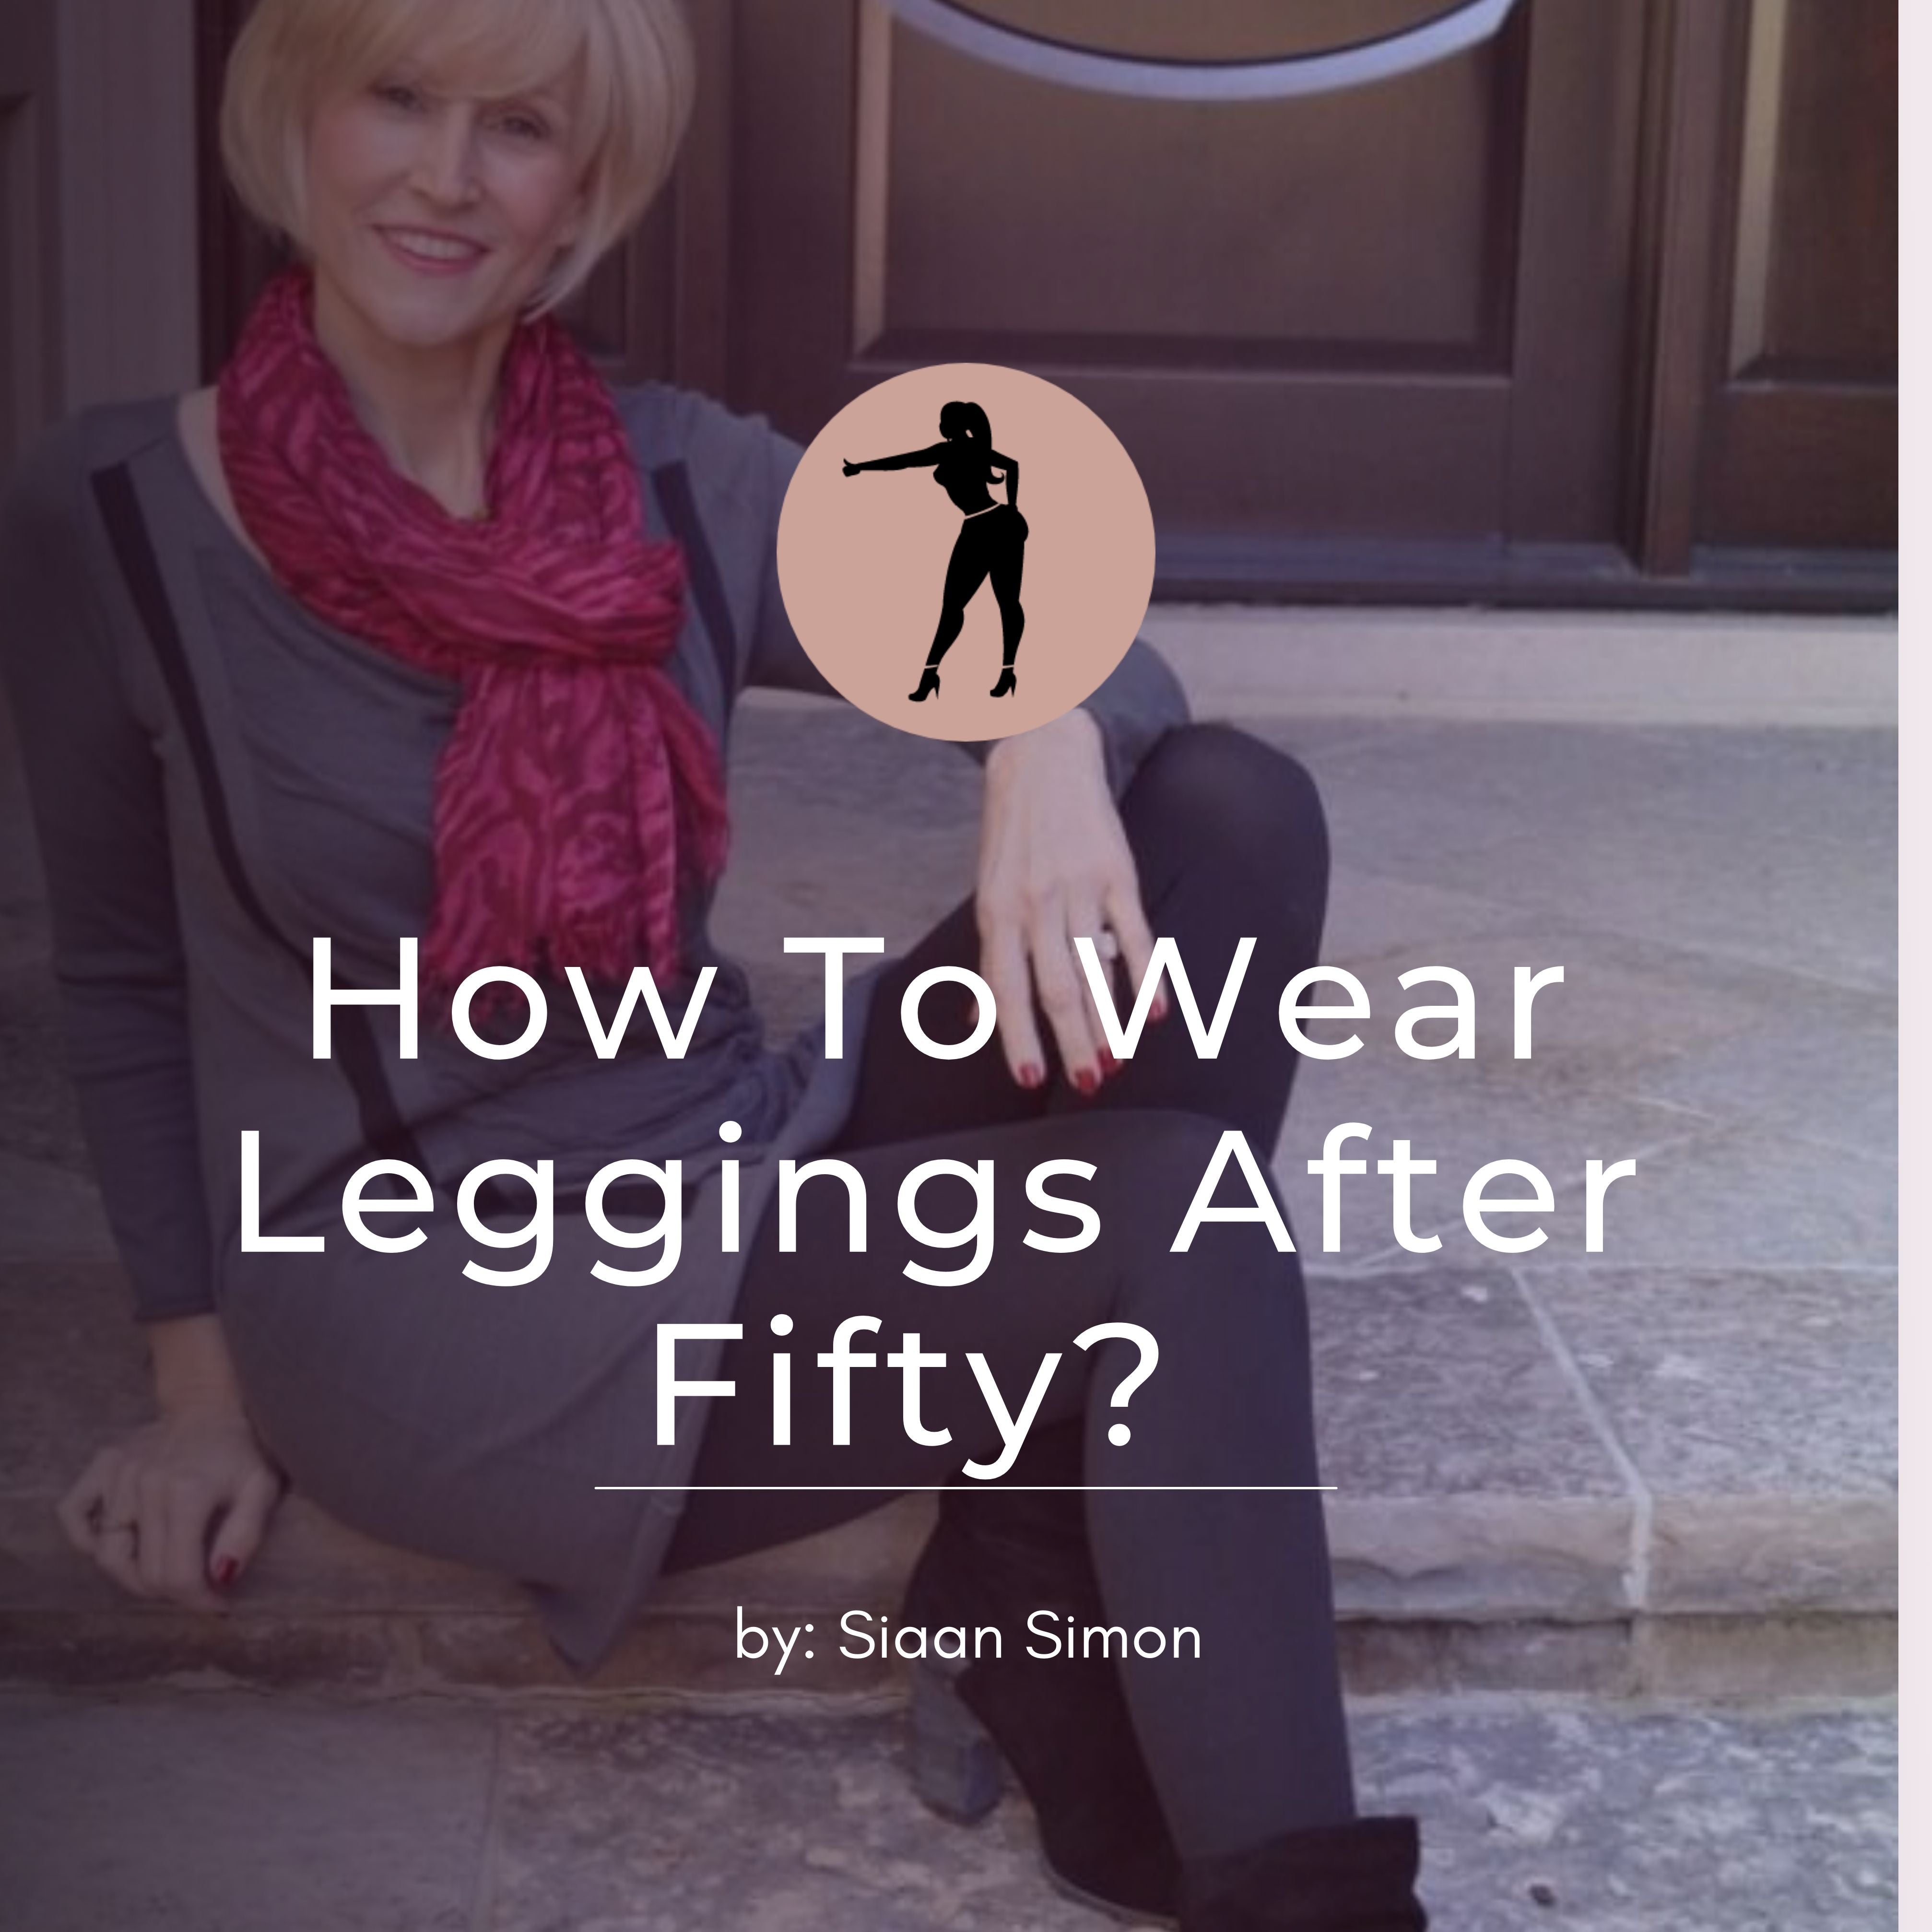 How To Wear Leggings After Fifty in 2021?